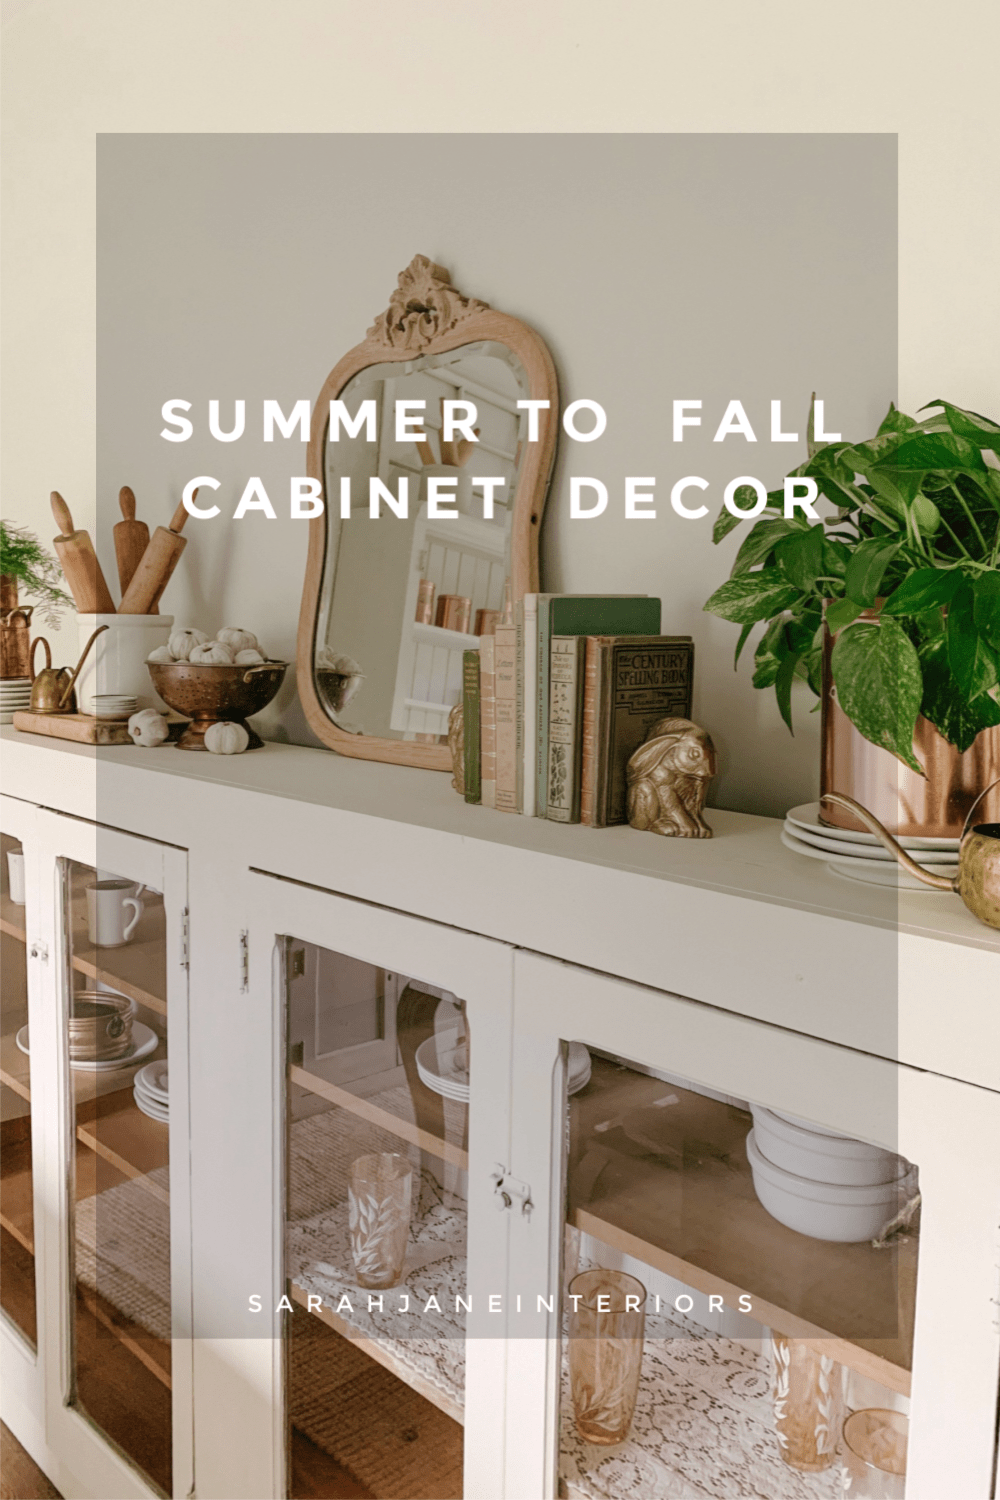 Summer to fall cabinet decor